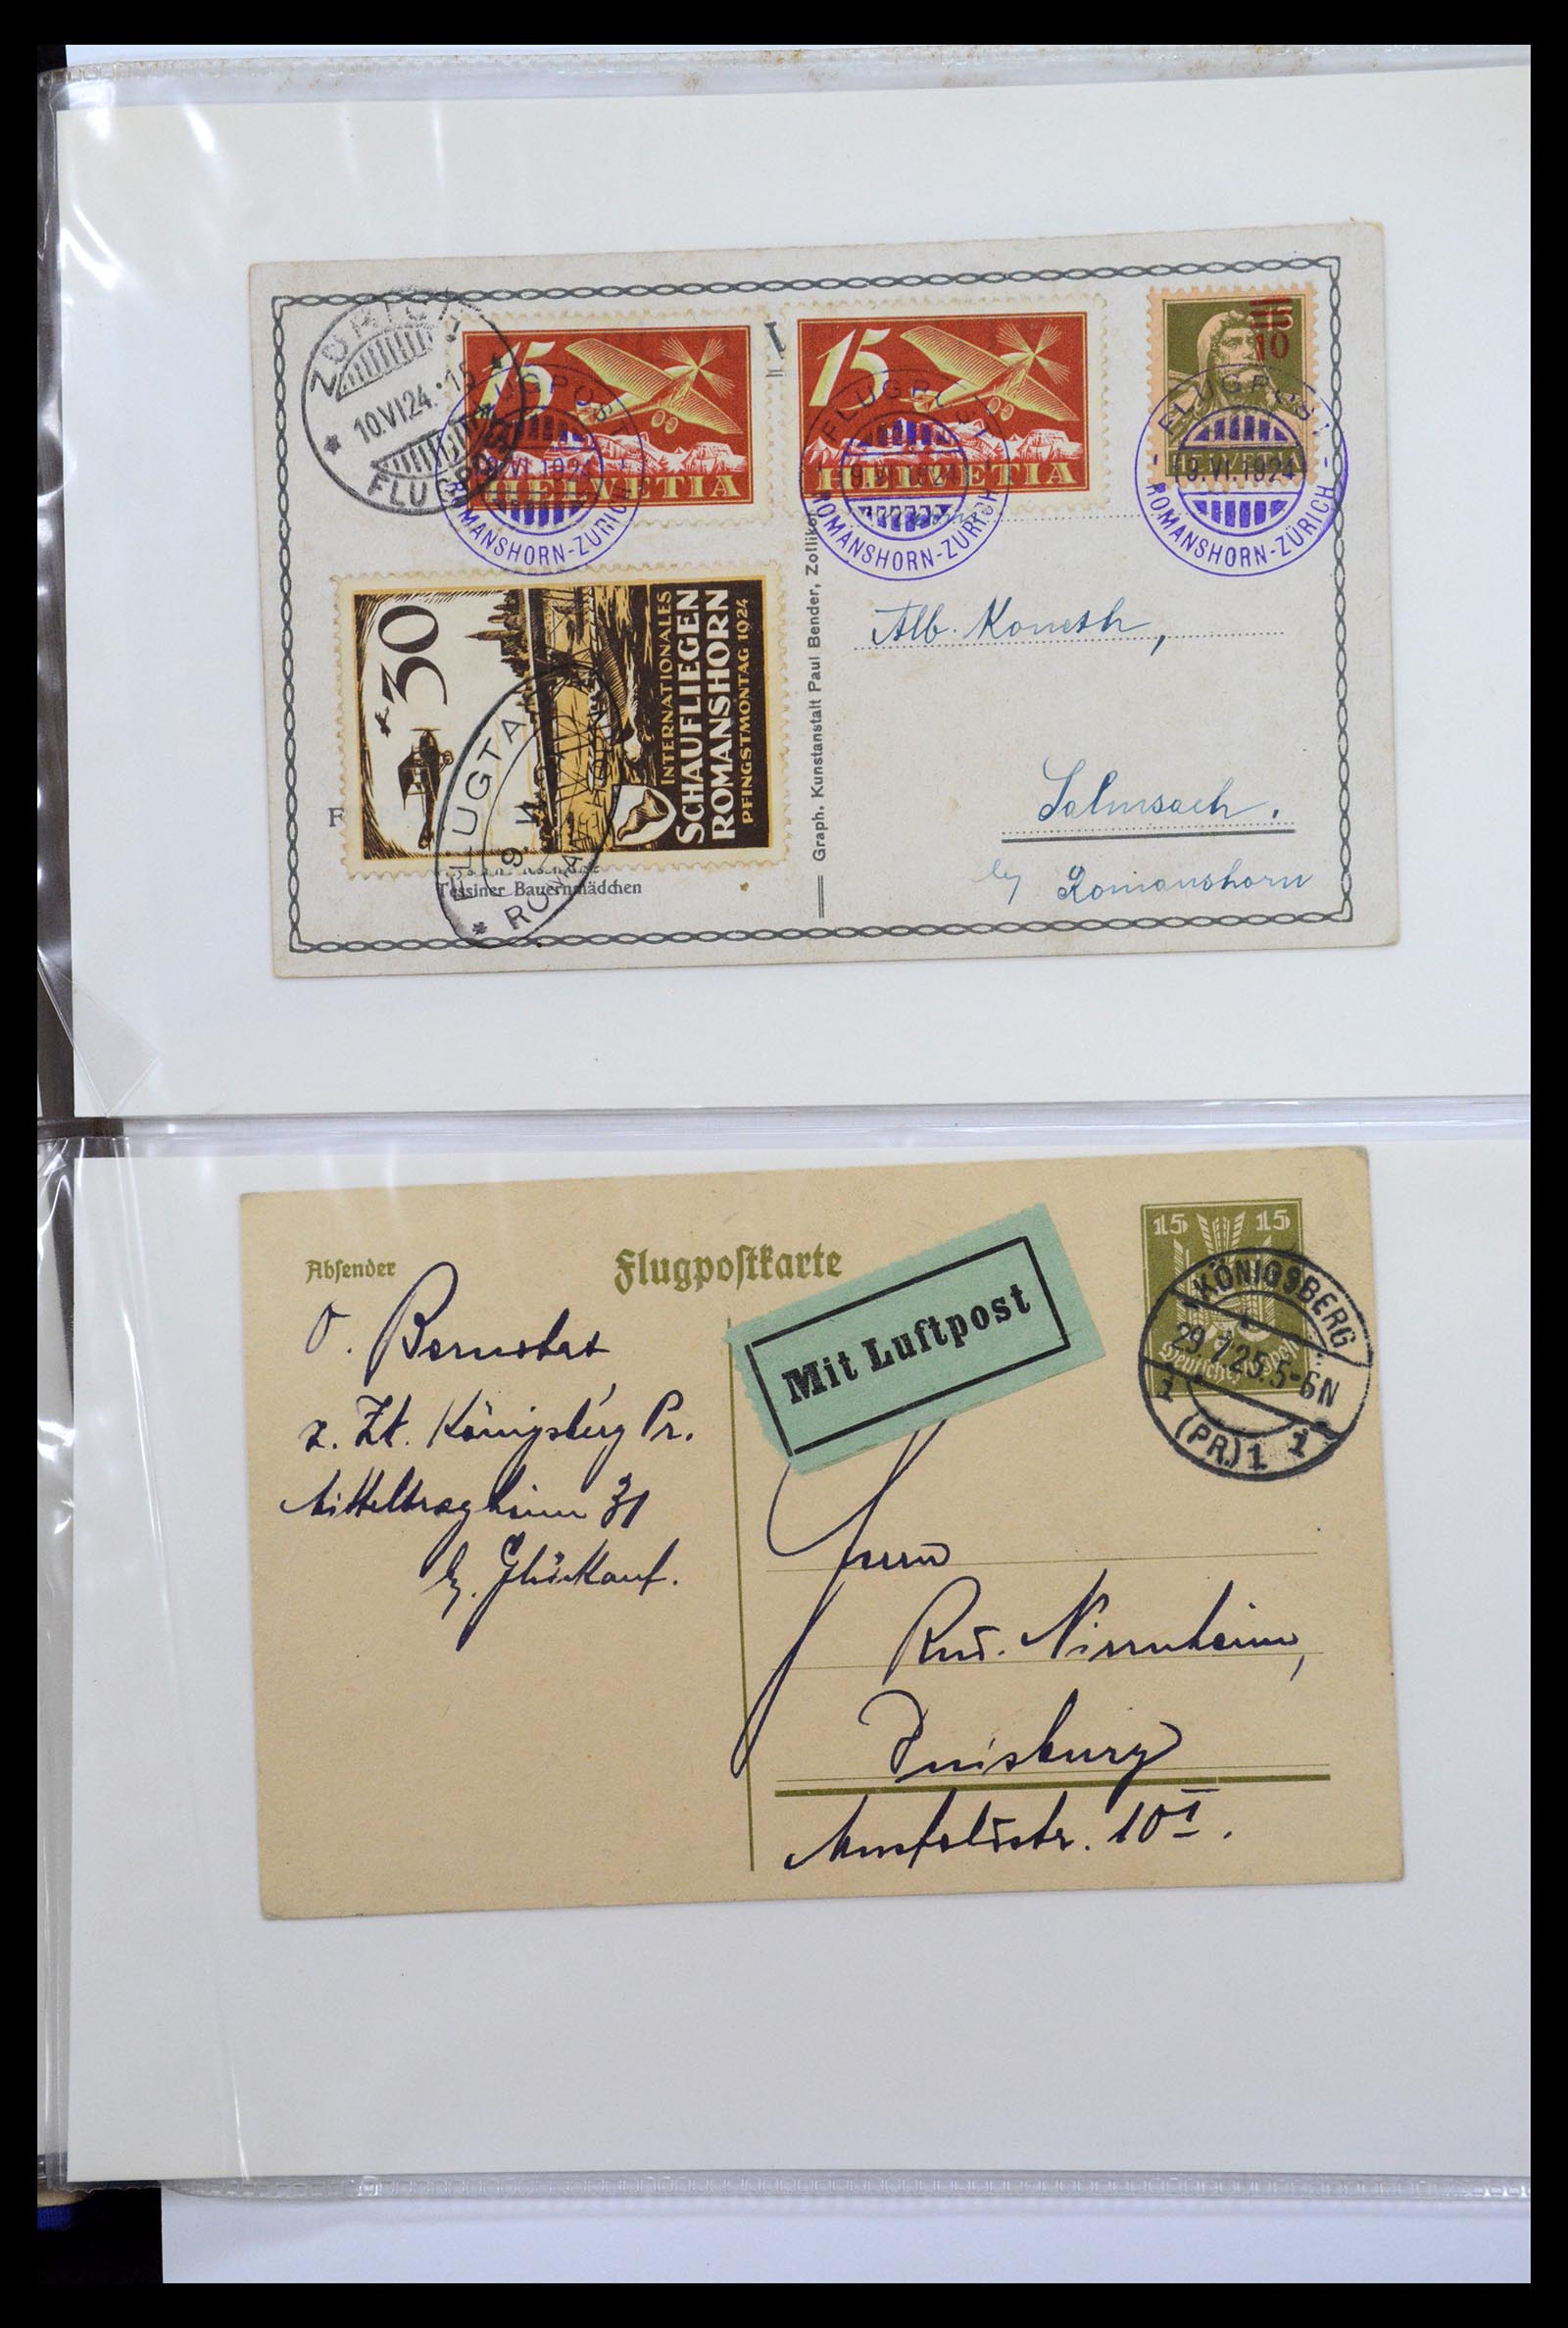 36009 015 - Stamp collection 36009 Airmail stamps and covers 1920-1940.